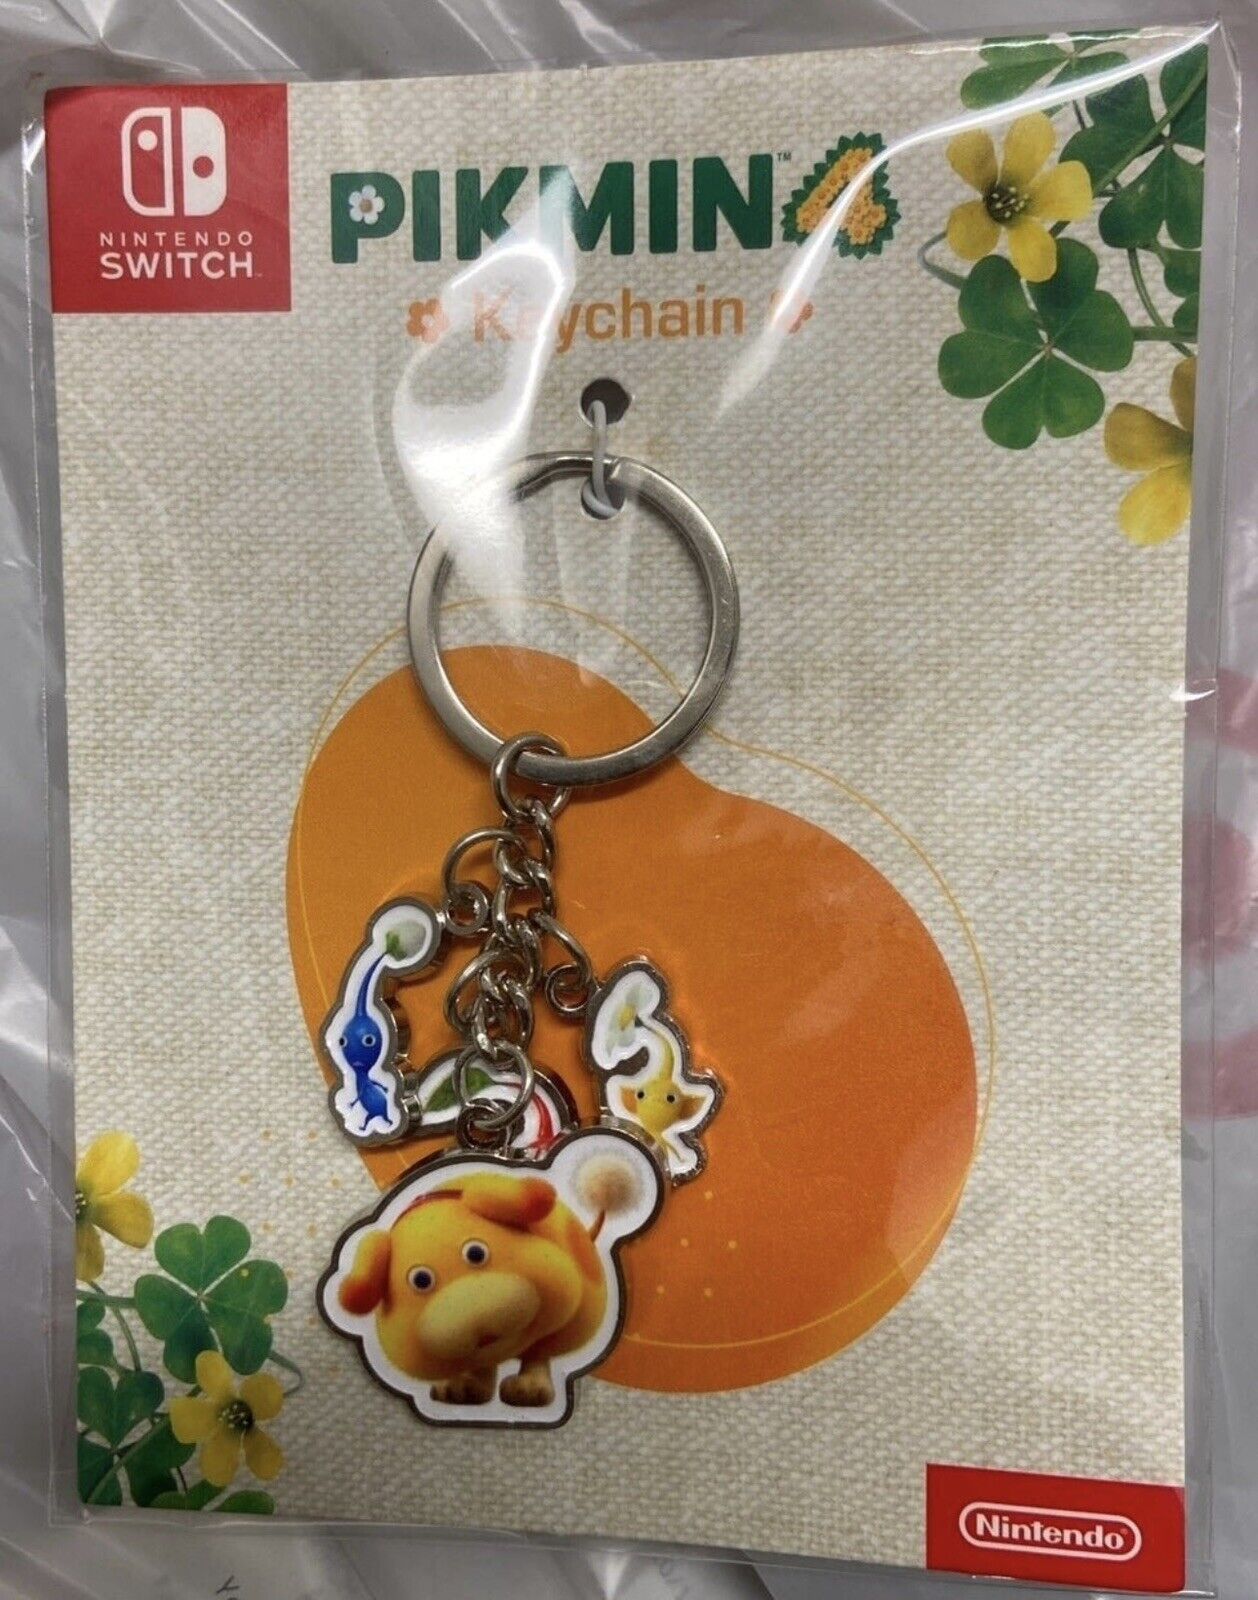 Pikmin 4 - Nintendo Switch - Keychain | Target Exclusive Collectible